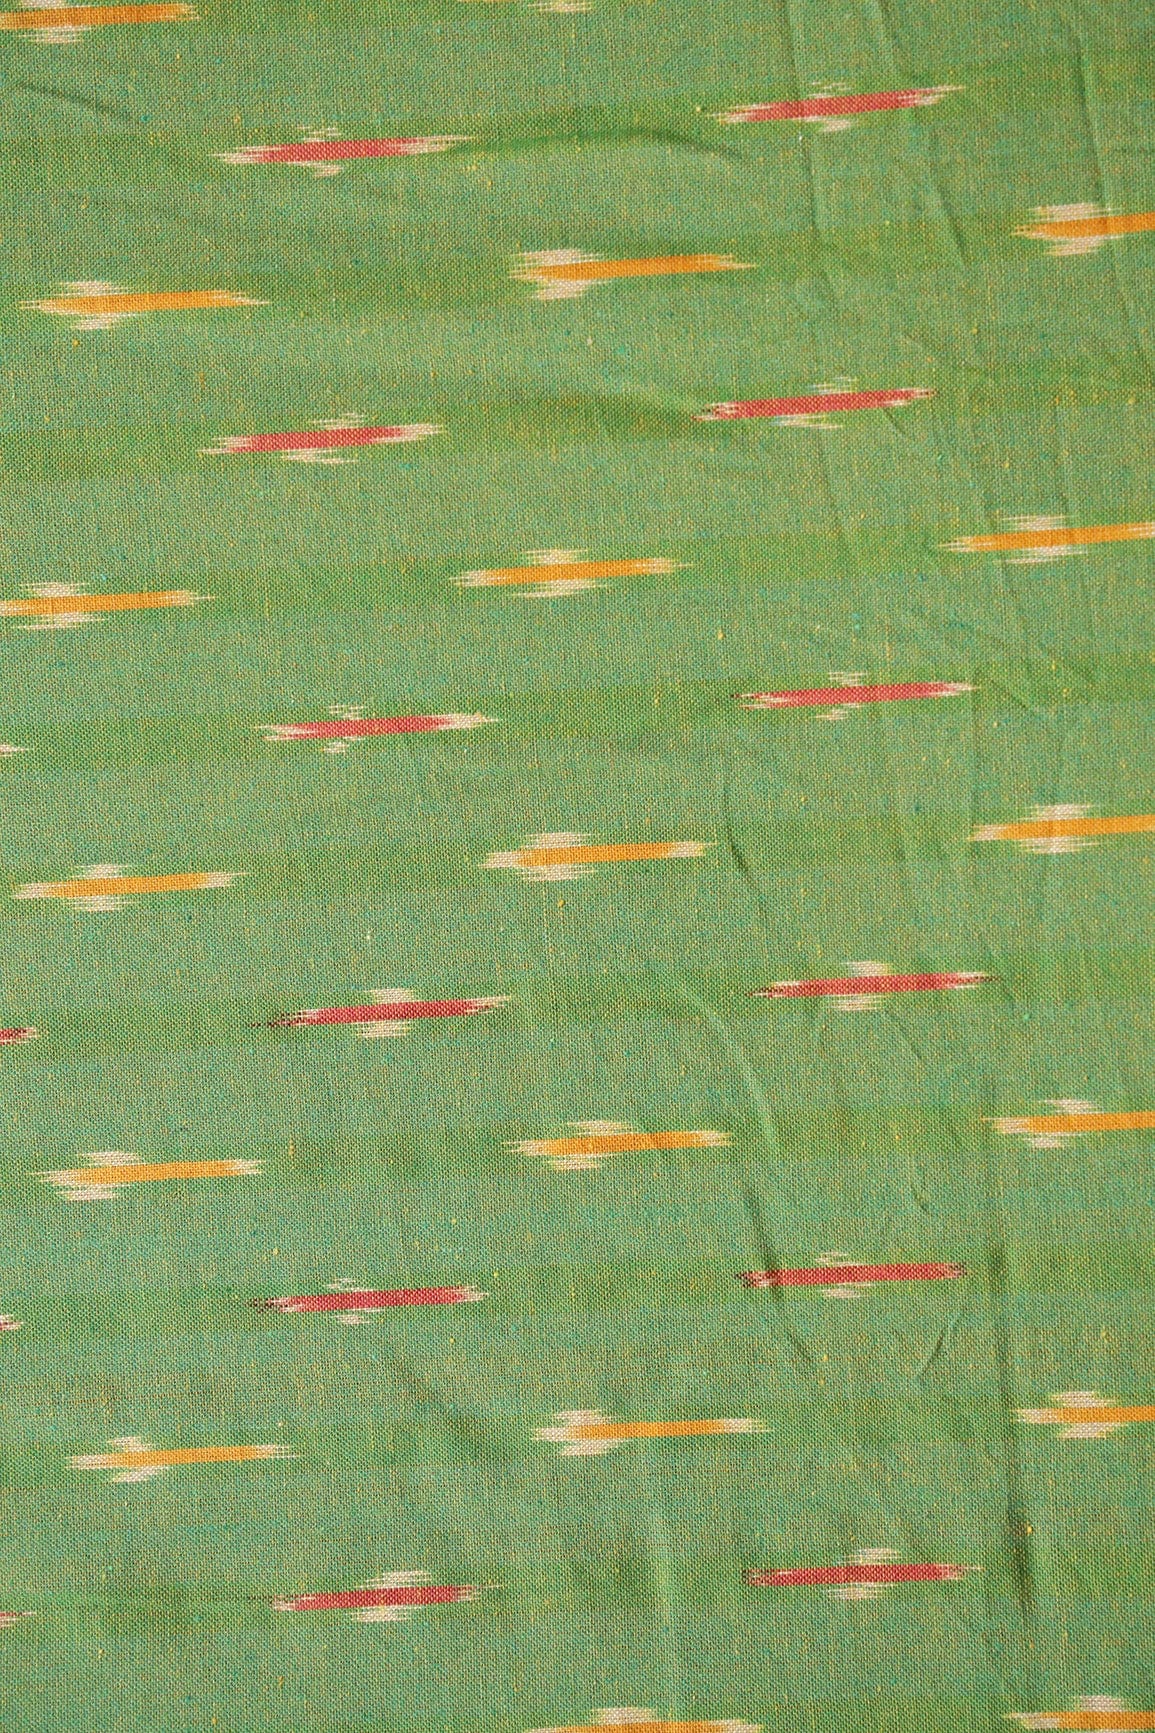 doeraa Hand Woven Parrot Green And Yellow Stripes Pattern Handwoven Ikat Organic Cotton Fabric